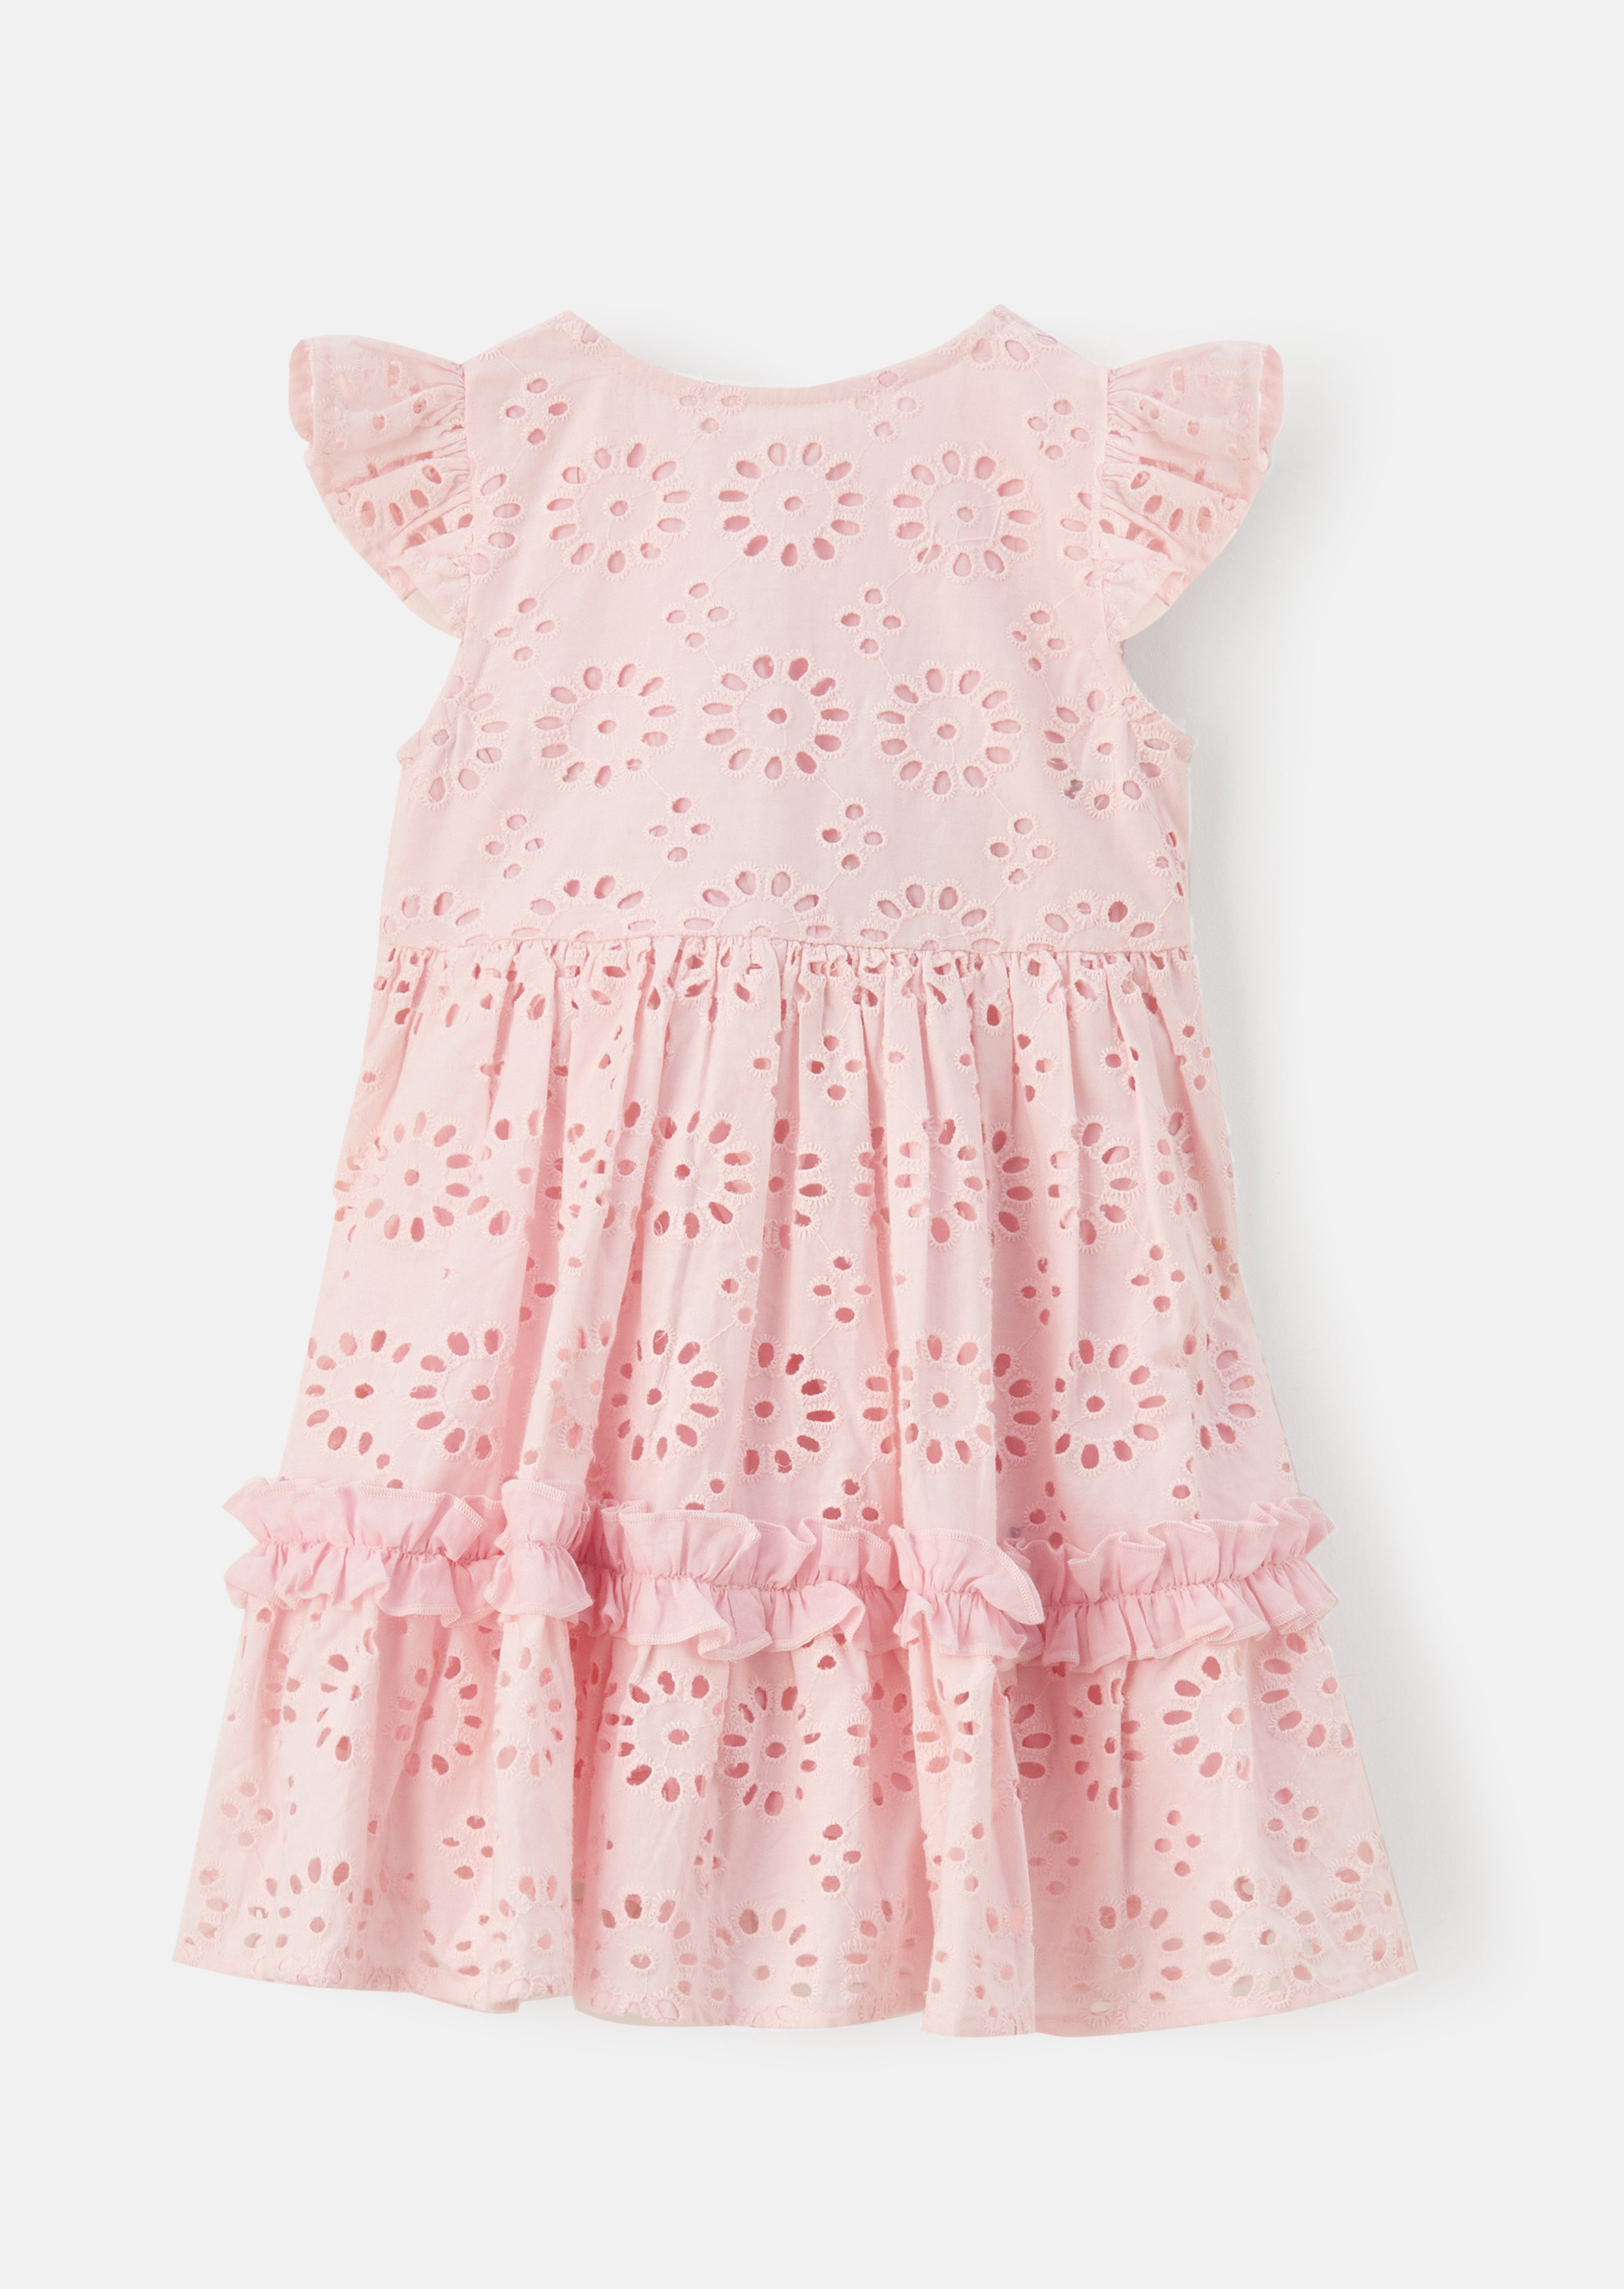 Girls Floral Embroidered Cotton Pink Dress with Pocket